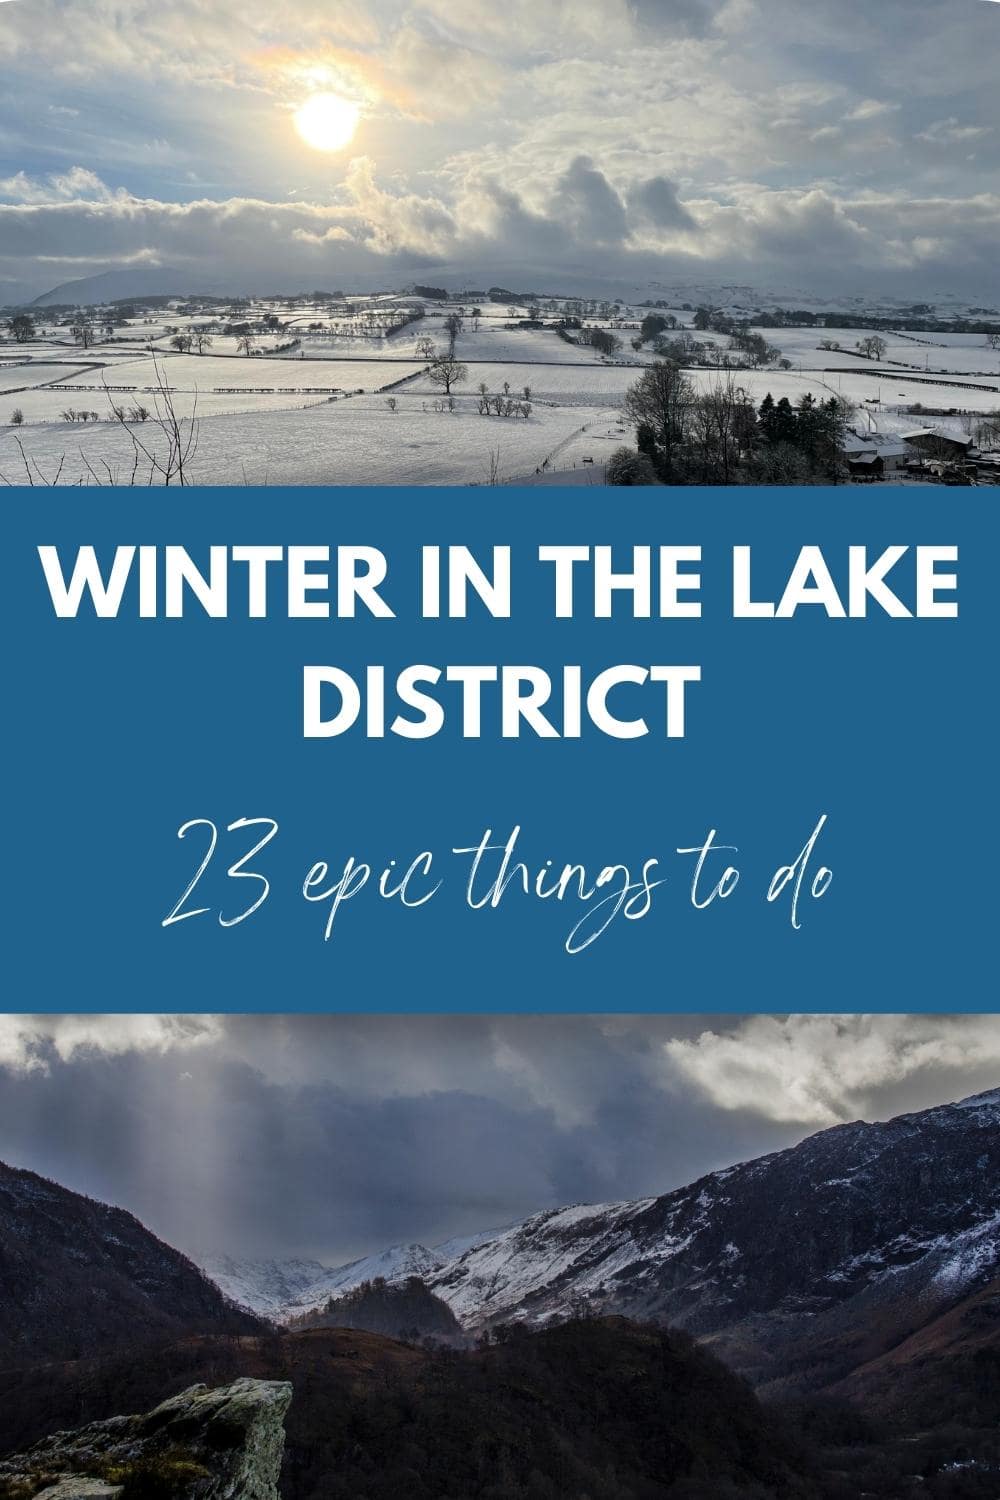 Things to do in the Lake District in Winter